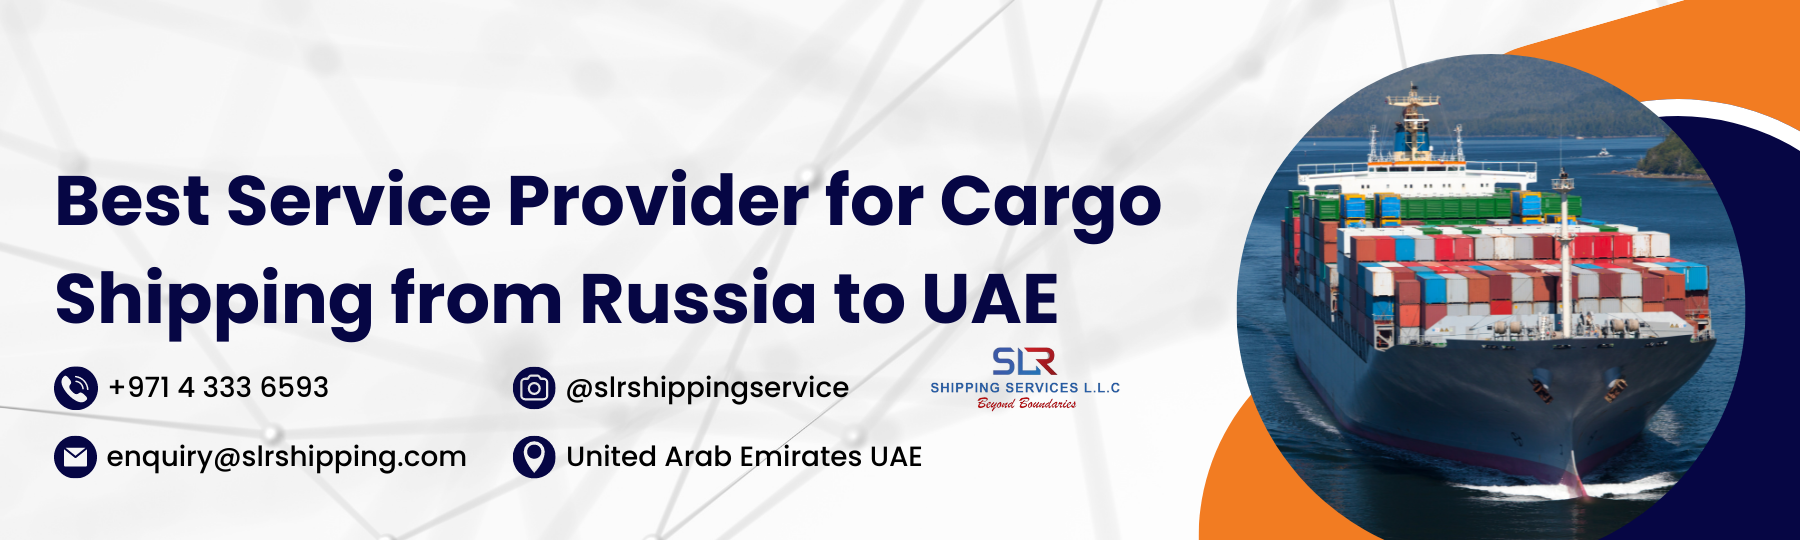 Choose the Best Service Provider for Cargo Shipping from Russia to UAE